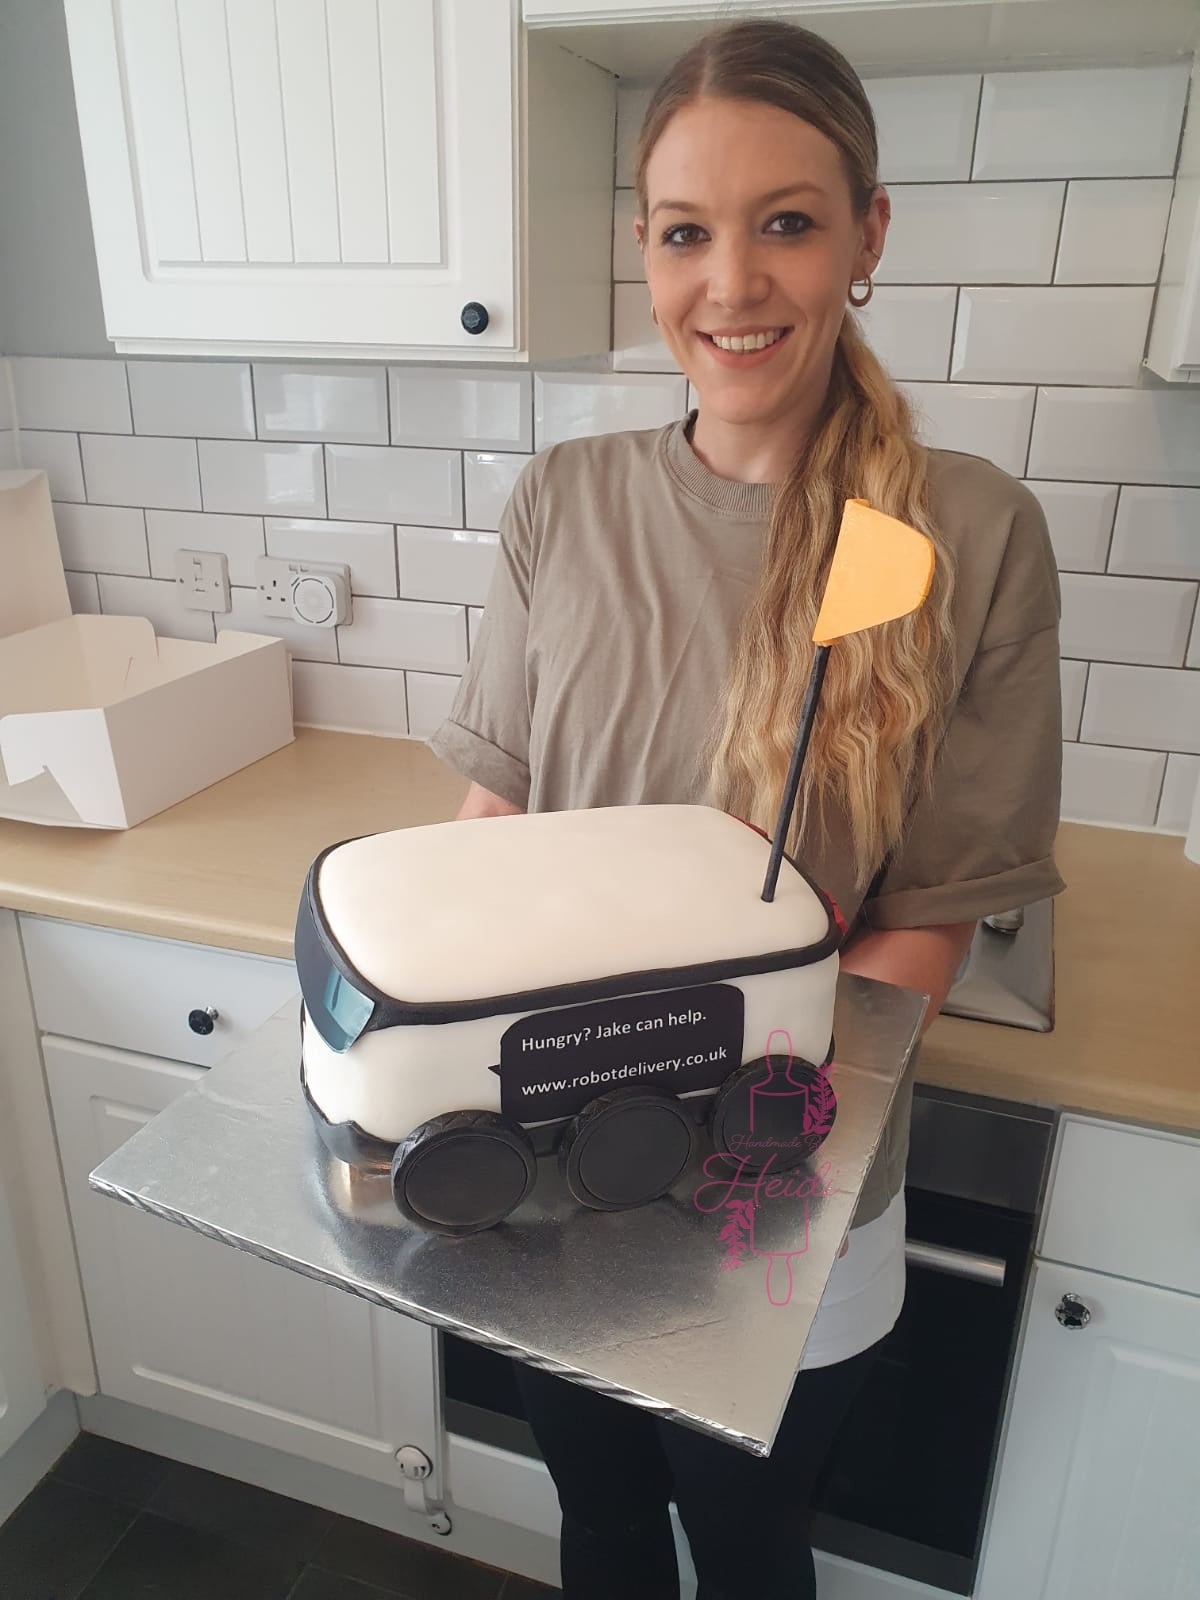 Baker Heidi Kay stands in her kitchen with a custom-made white go-kart cake with yellow flag